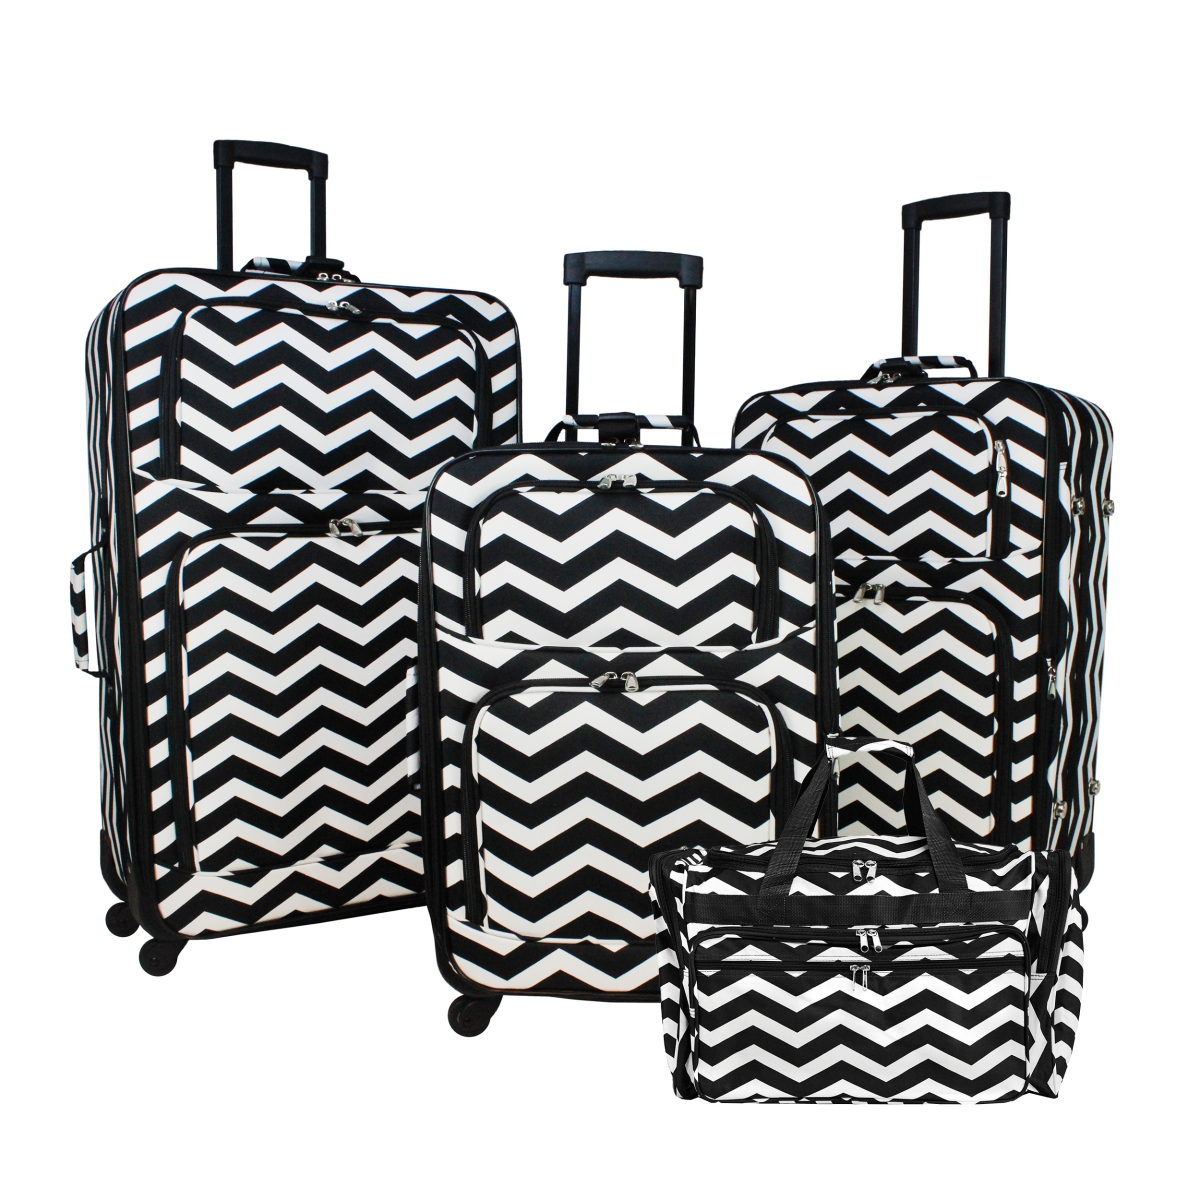 818703-t19-165b-w 4 Piece Rolling Expandable Spinner Luggage Set - Black & White Chevron